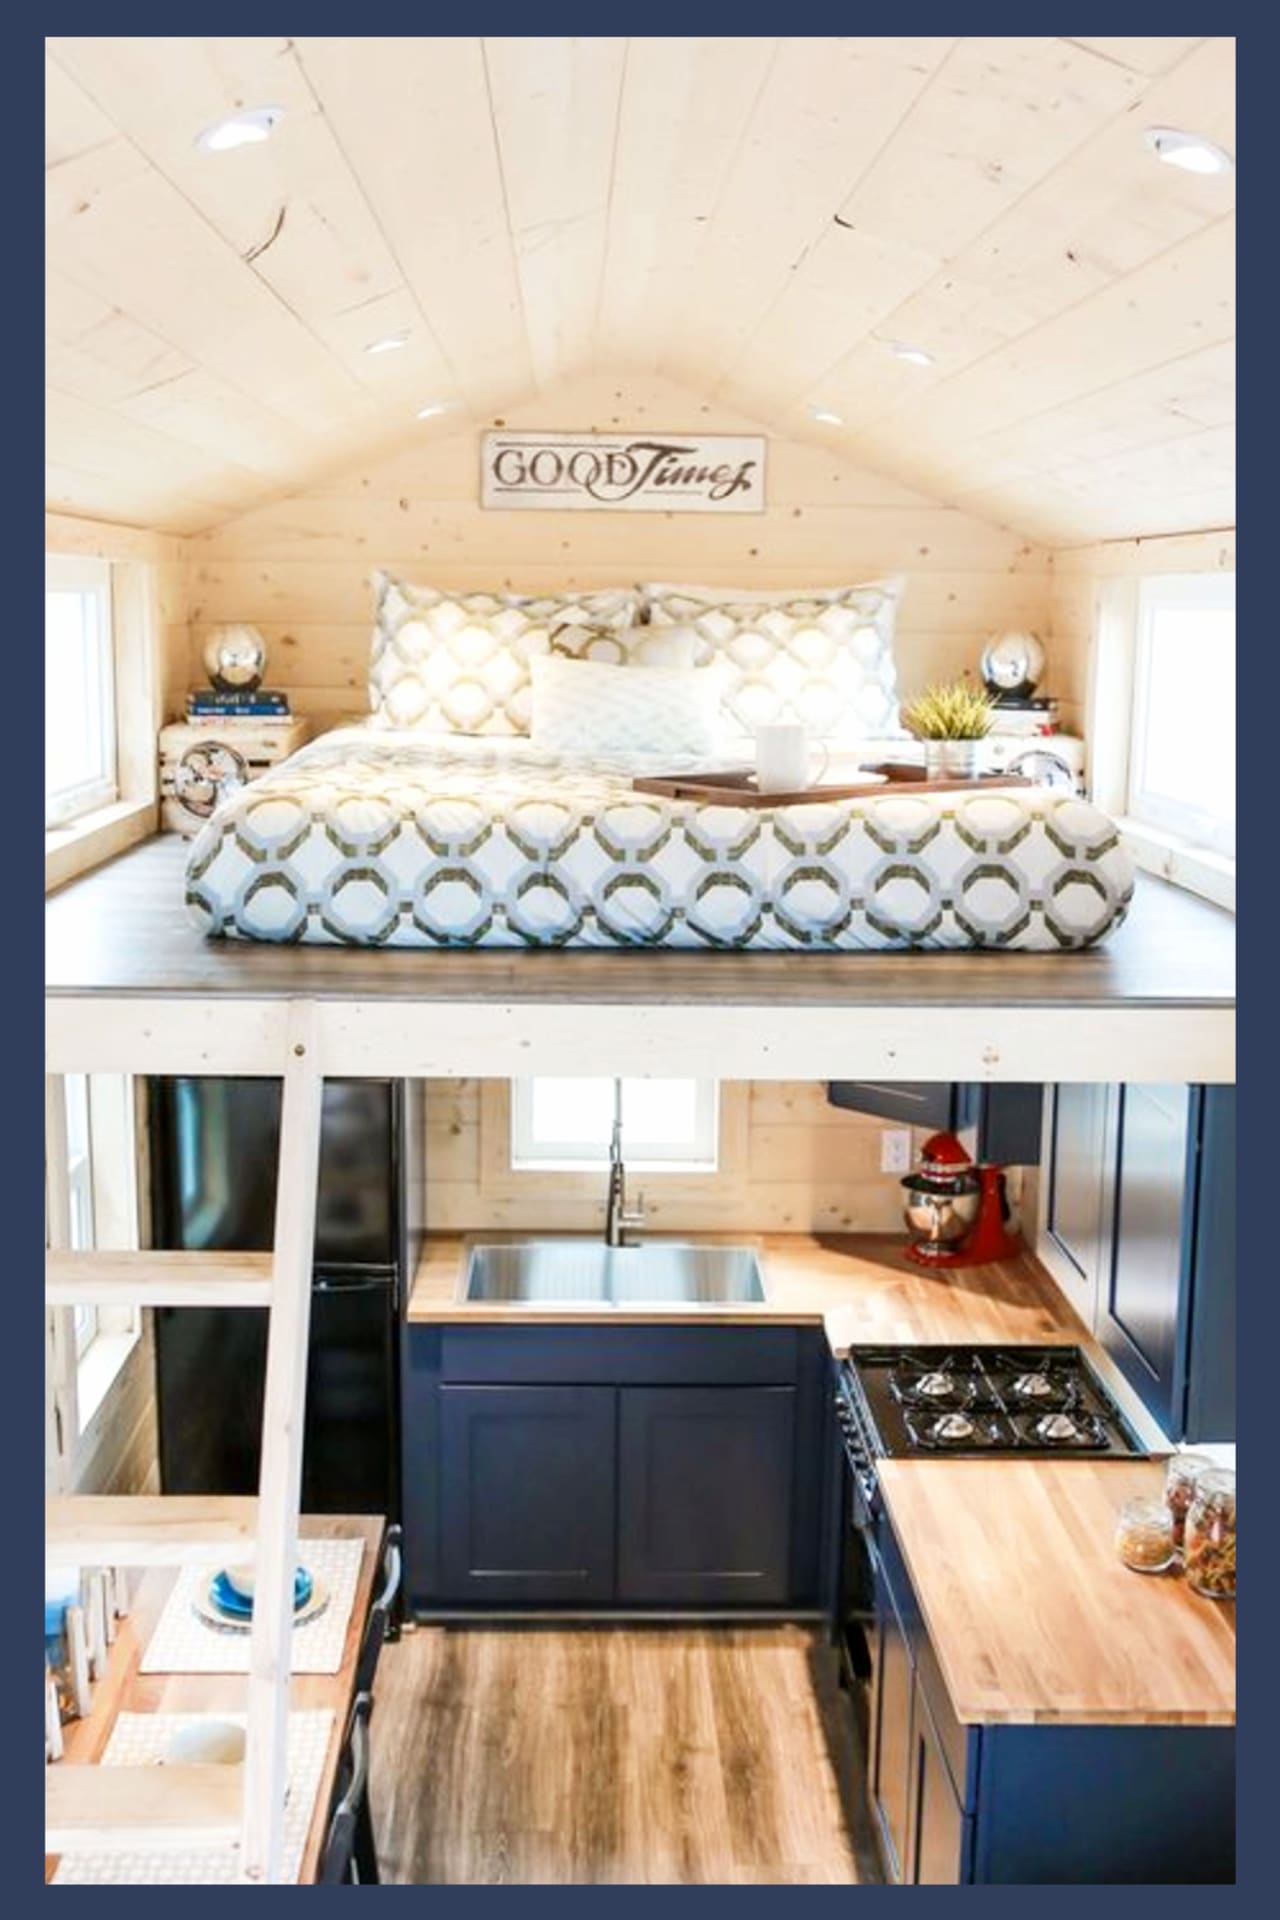 Tiny House Ideas! Love HGTV Tiny Homes? Take a look inside tiny houses with these tiny house interior photos and images (interior AND exterior) These tiny house designs and floor plans are perfect tiny house plans under 1000 sq ft - they're like a tiny apartment on wheels for tiny home communities! Tiny house bedroom ideas - loft ideas for tiny home